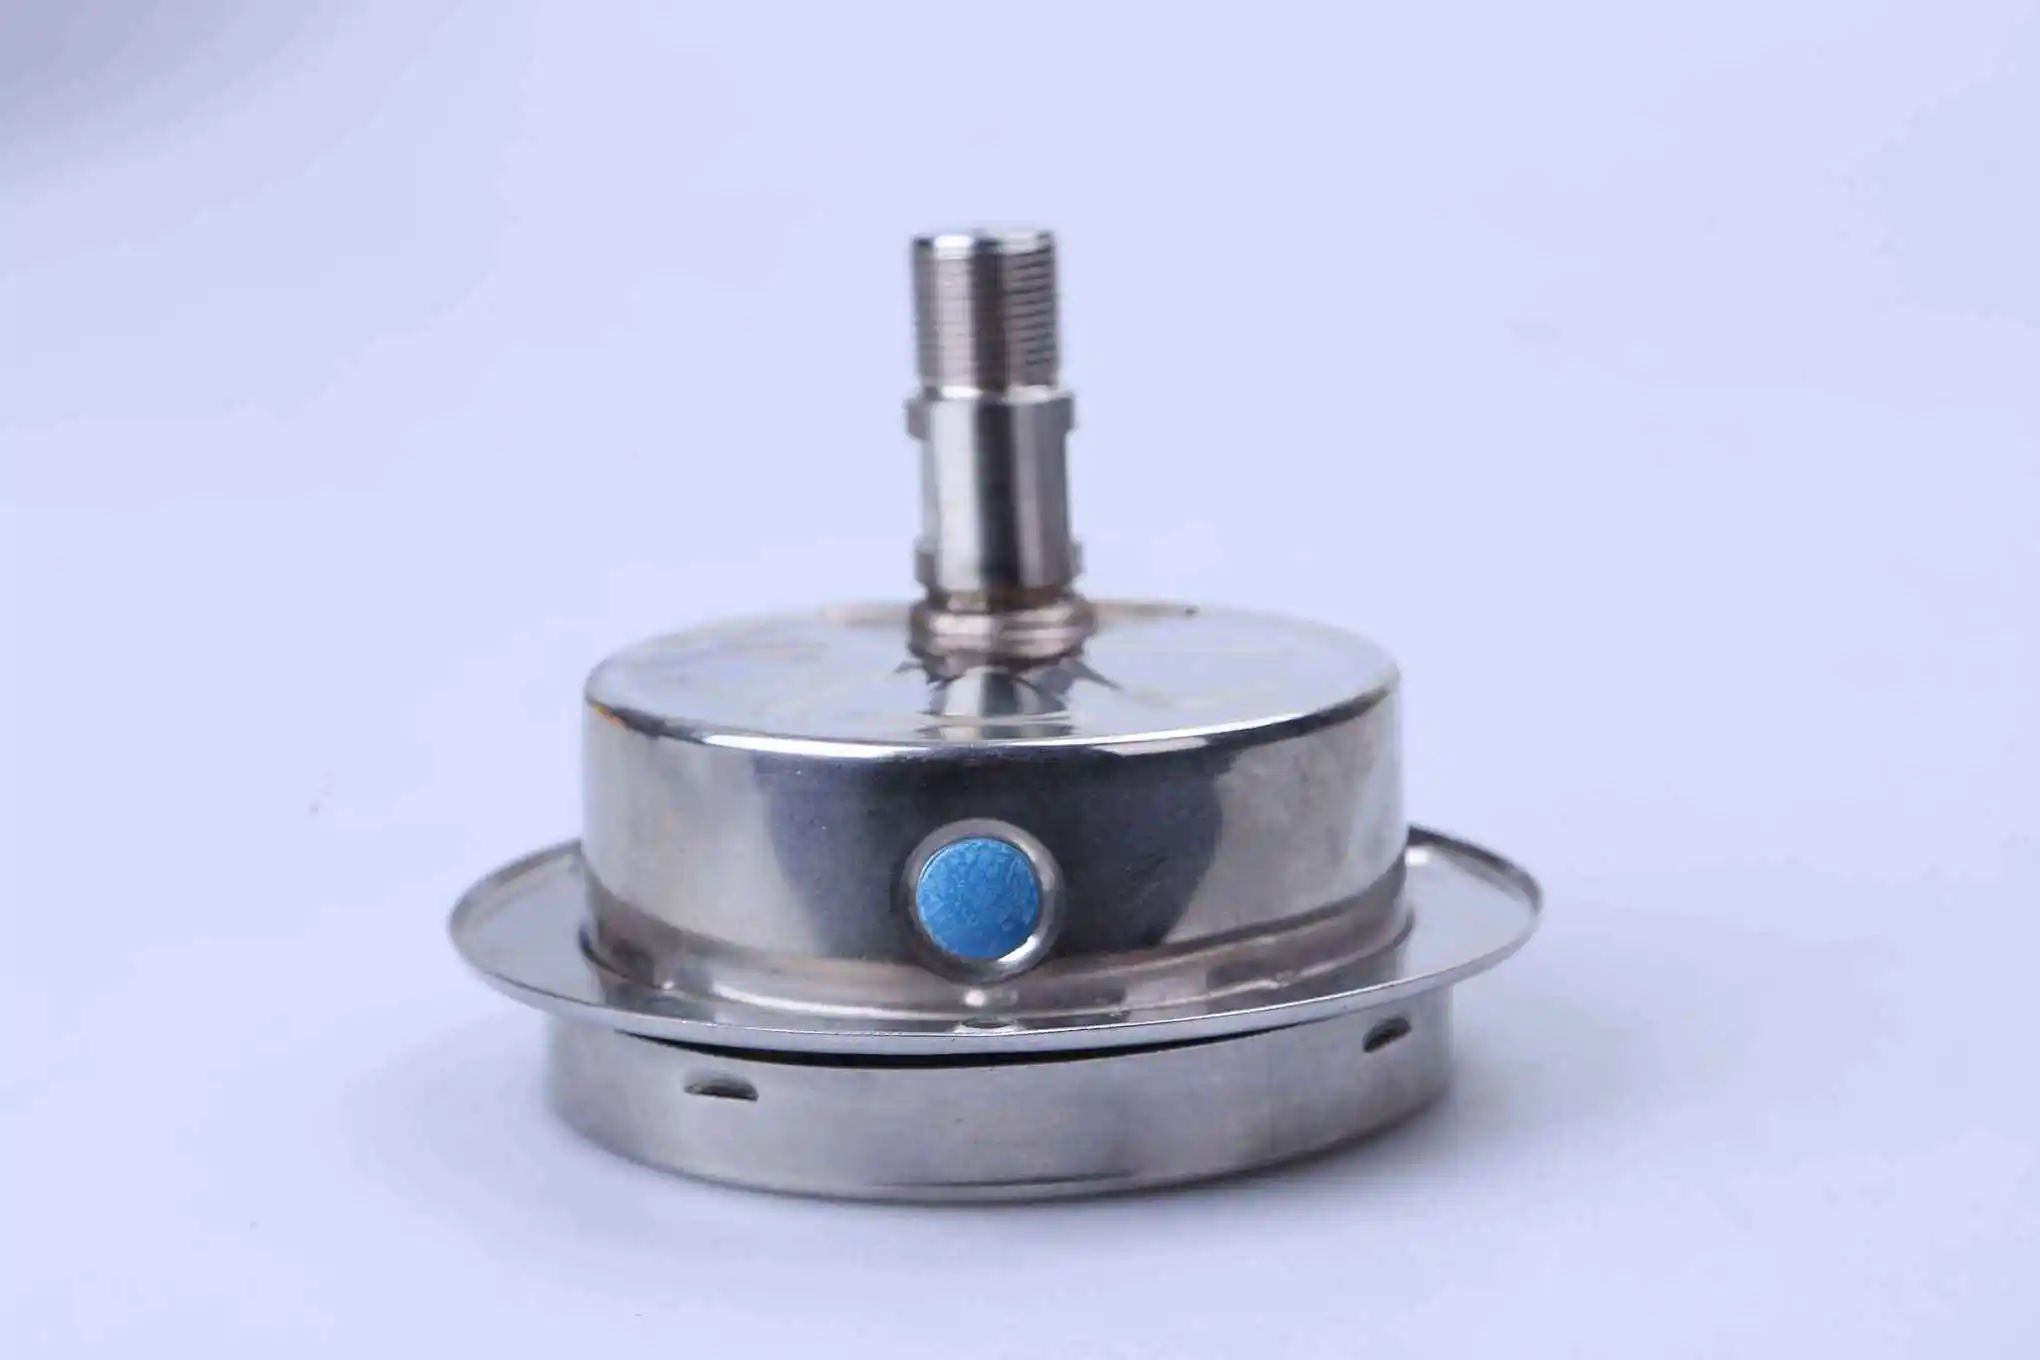 instrument-stainless-steel-axial-pressure-gauge-with-edge-y-150bf-xt-high-temperature-resistant-acid-and-alkali-resistant